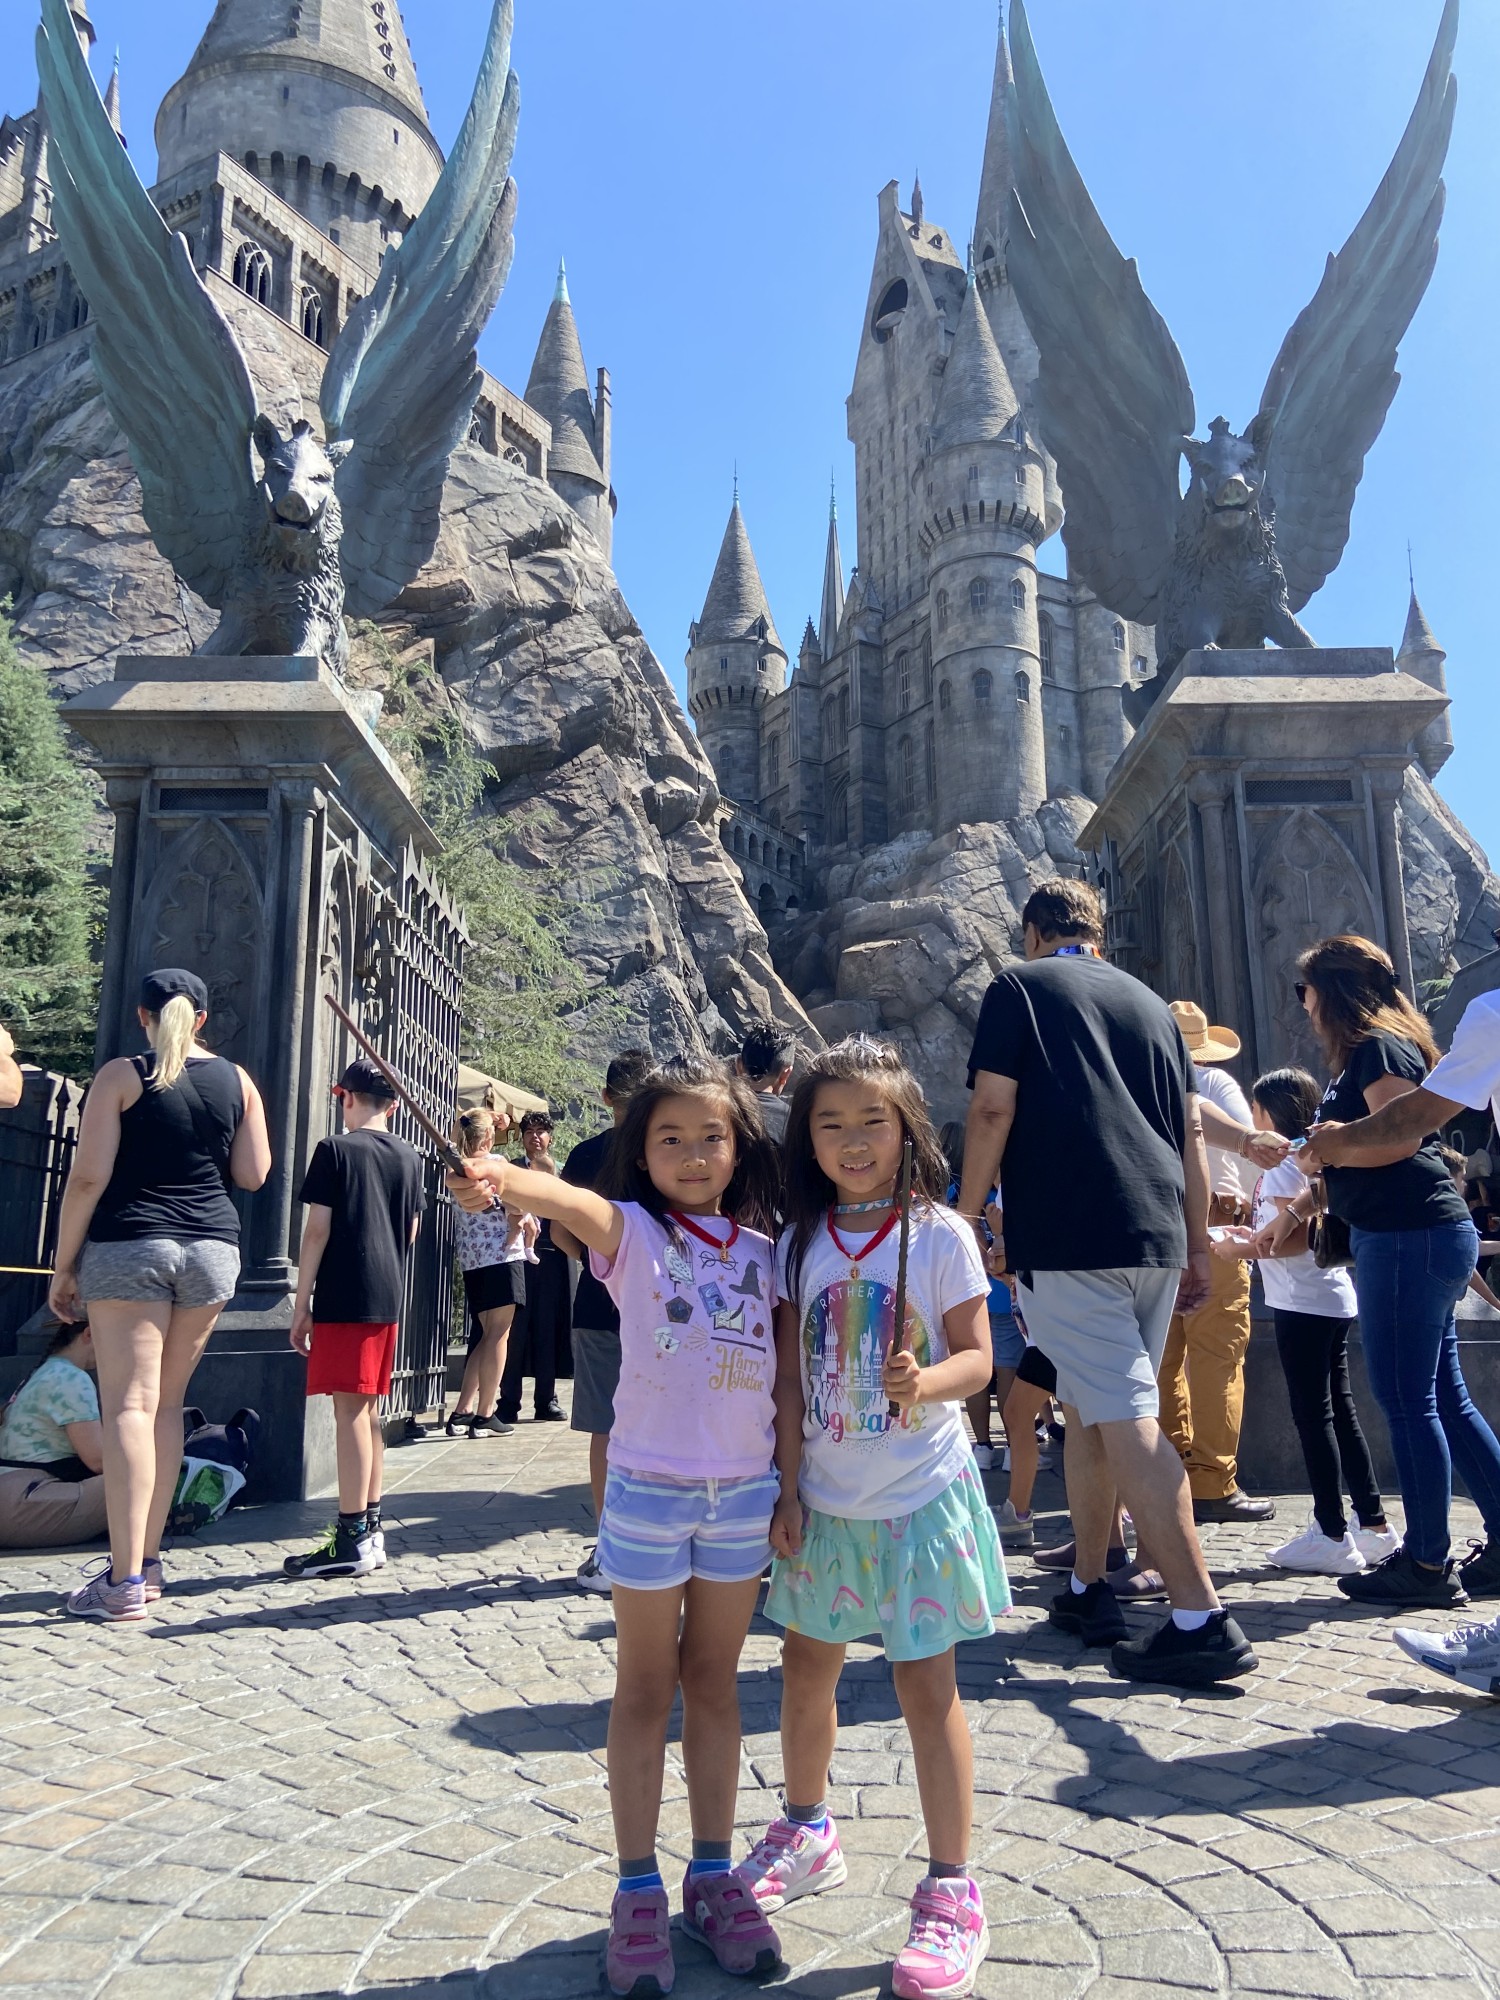 Hogwarts! Only Daddy went on the ride inside because we are too short and Mommy gets too motion sick.